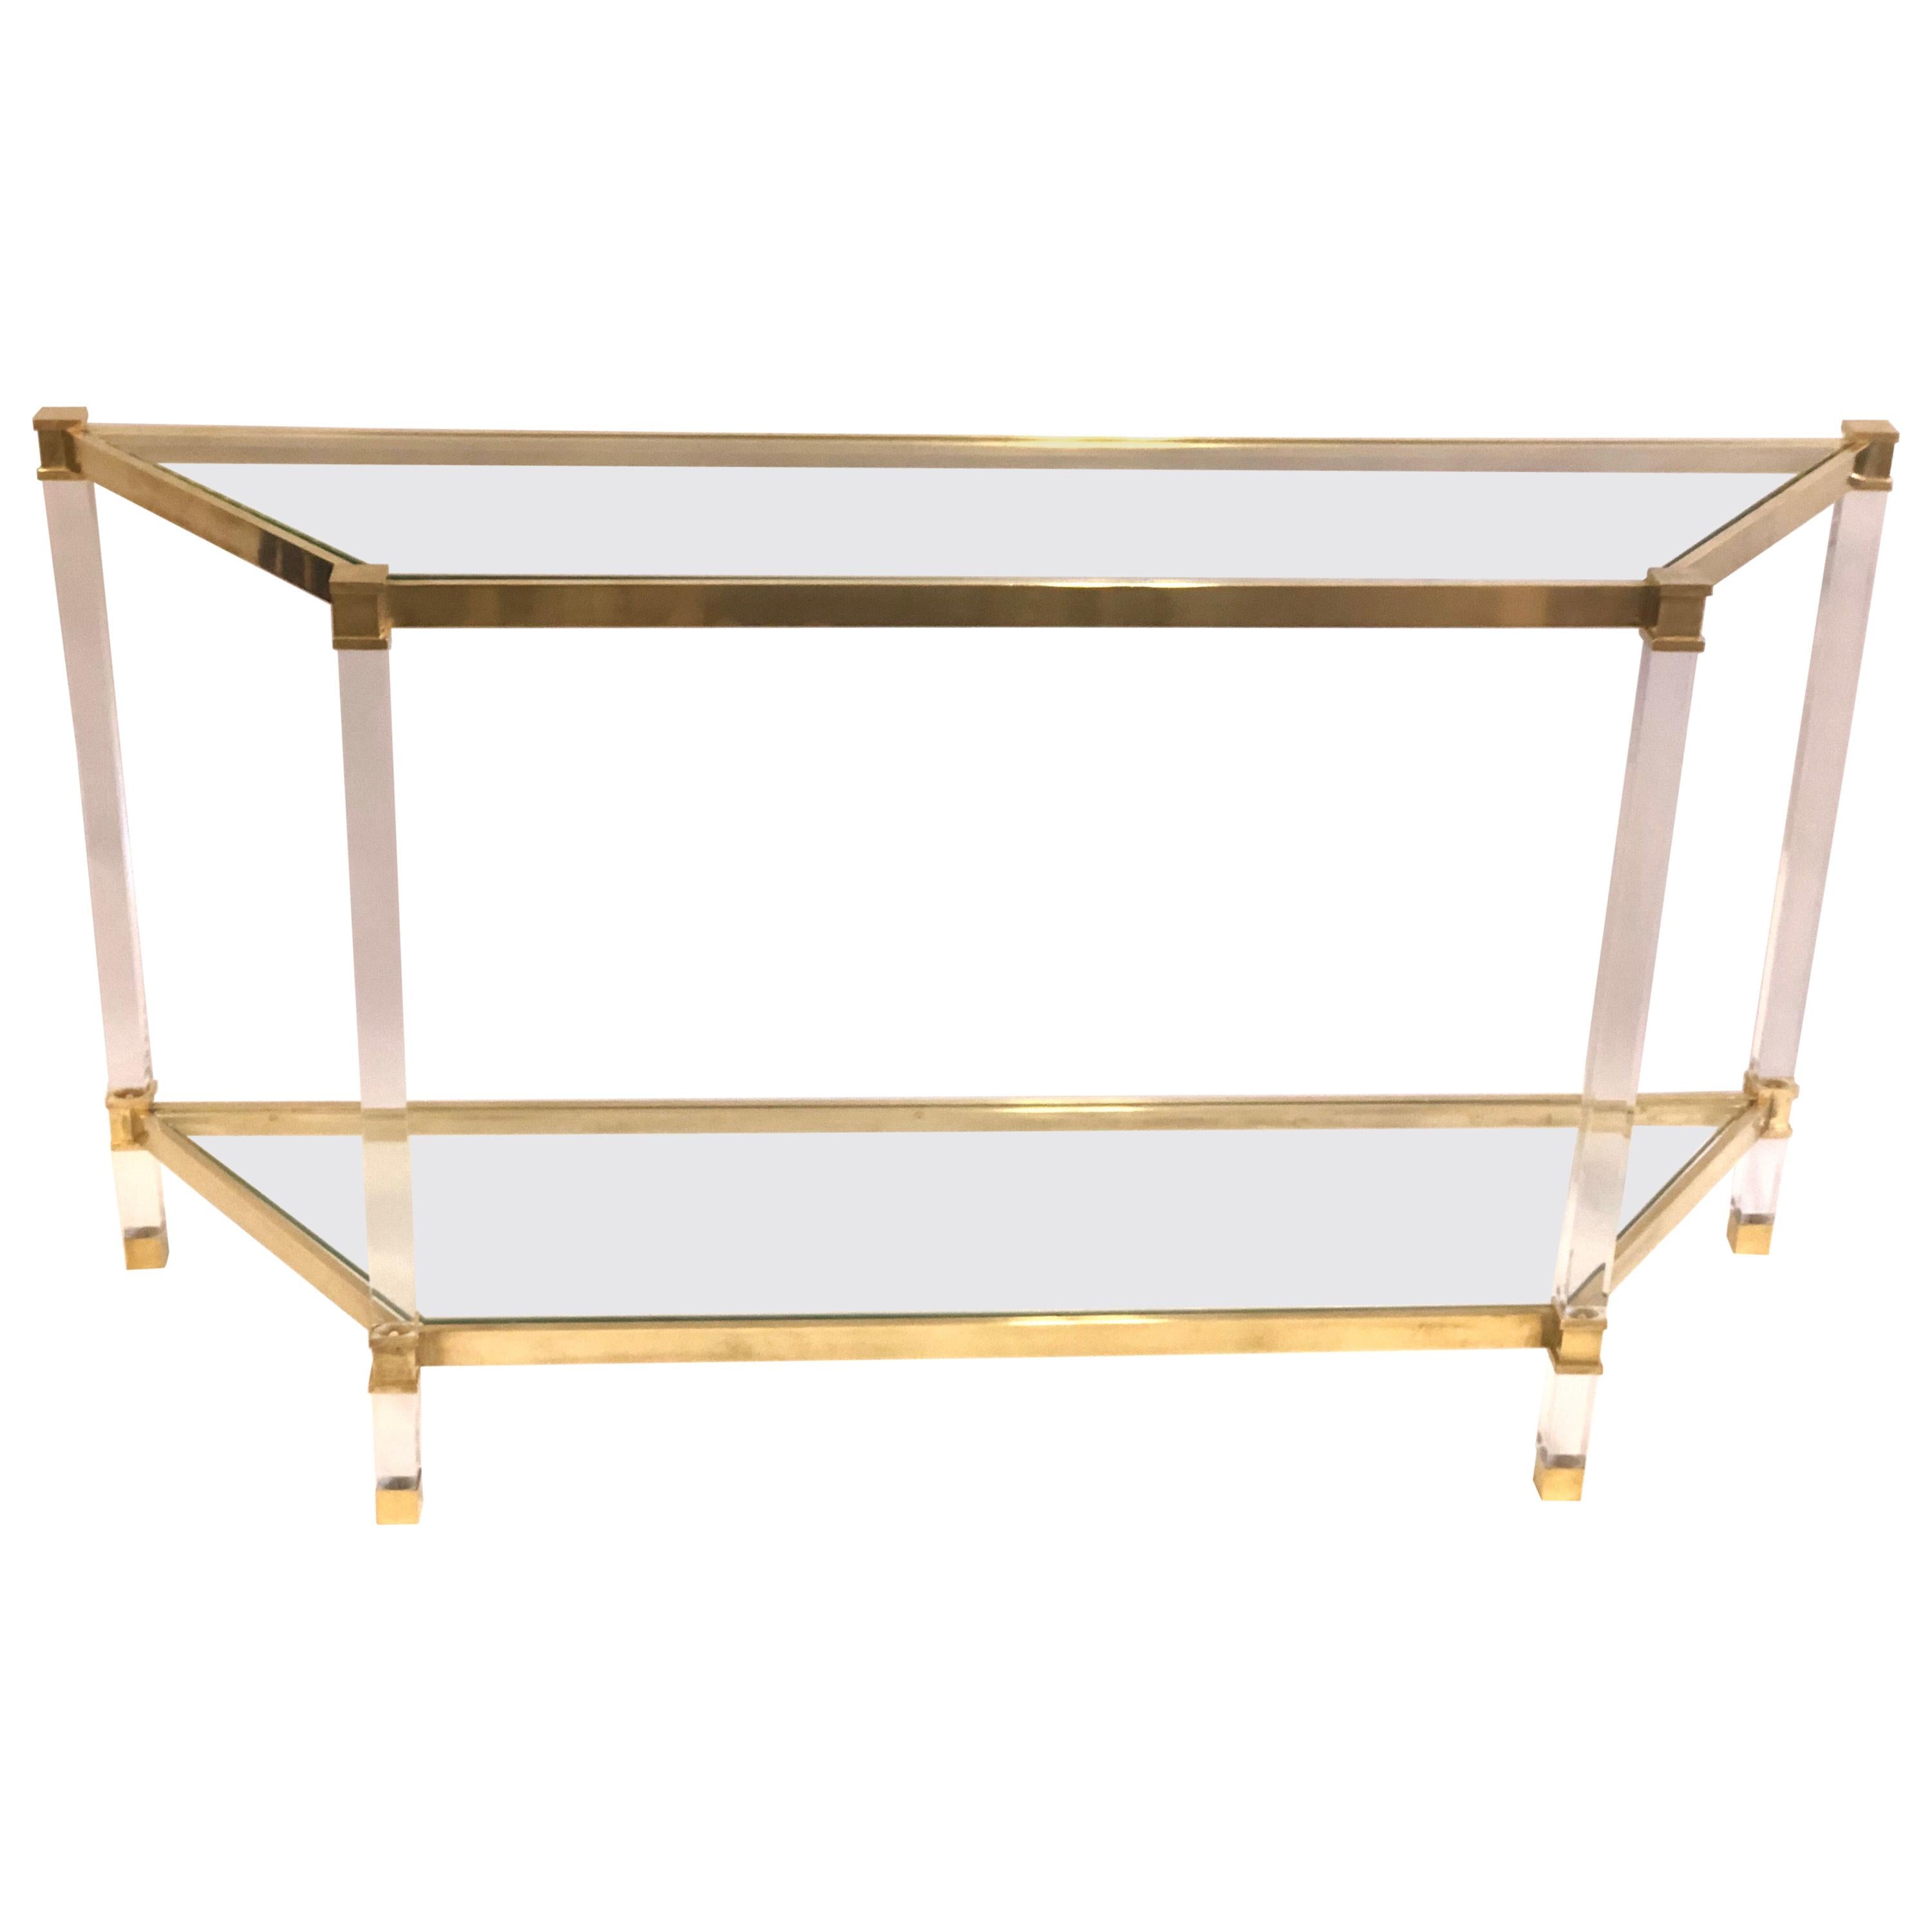 French Double Level Lucite, Brass and Glass Trapezoid Form Console / Sofa Table